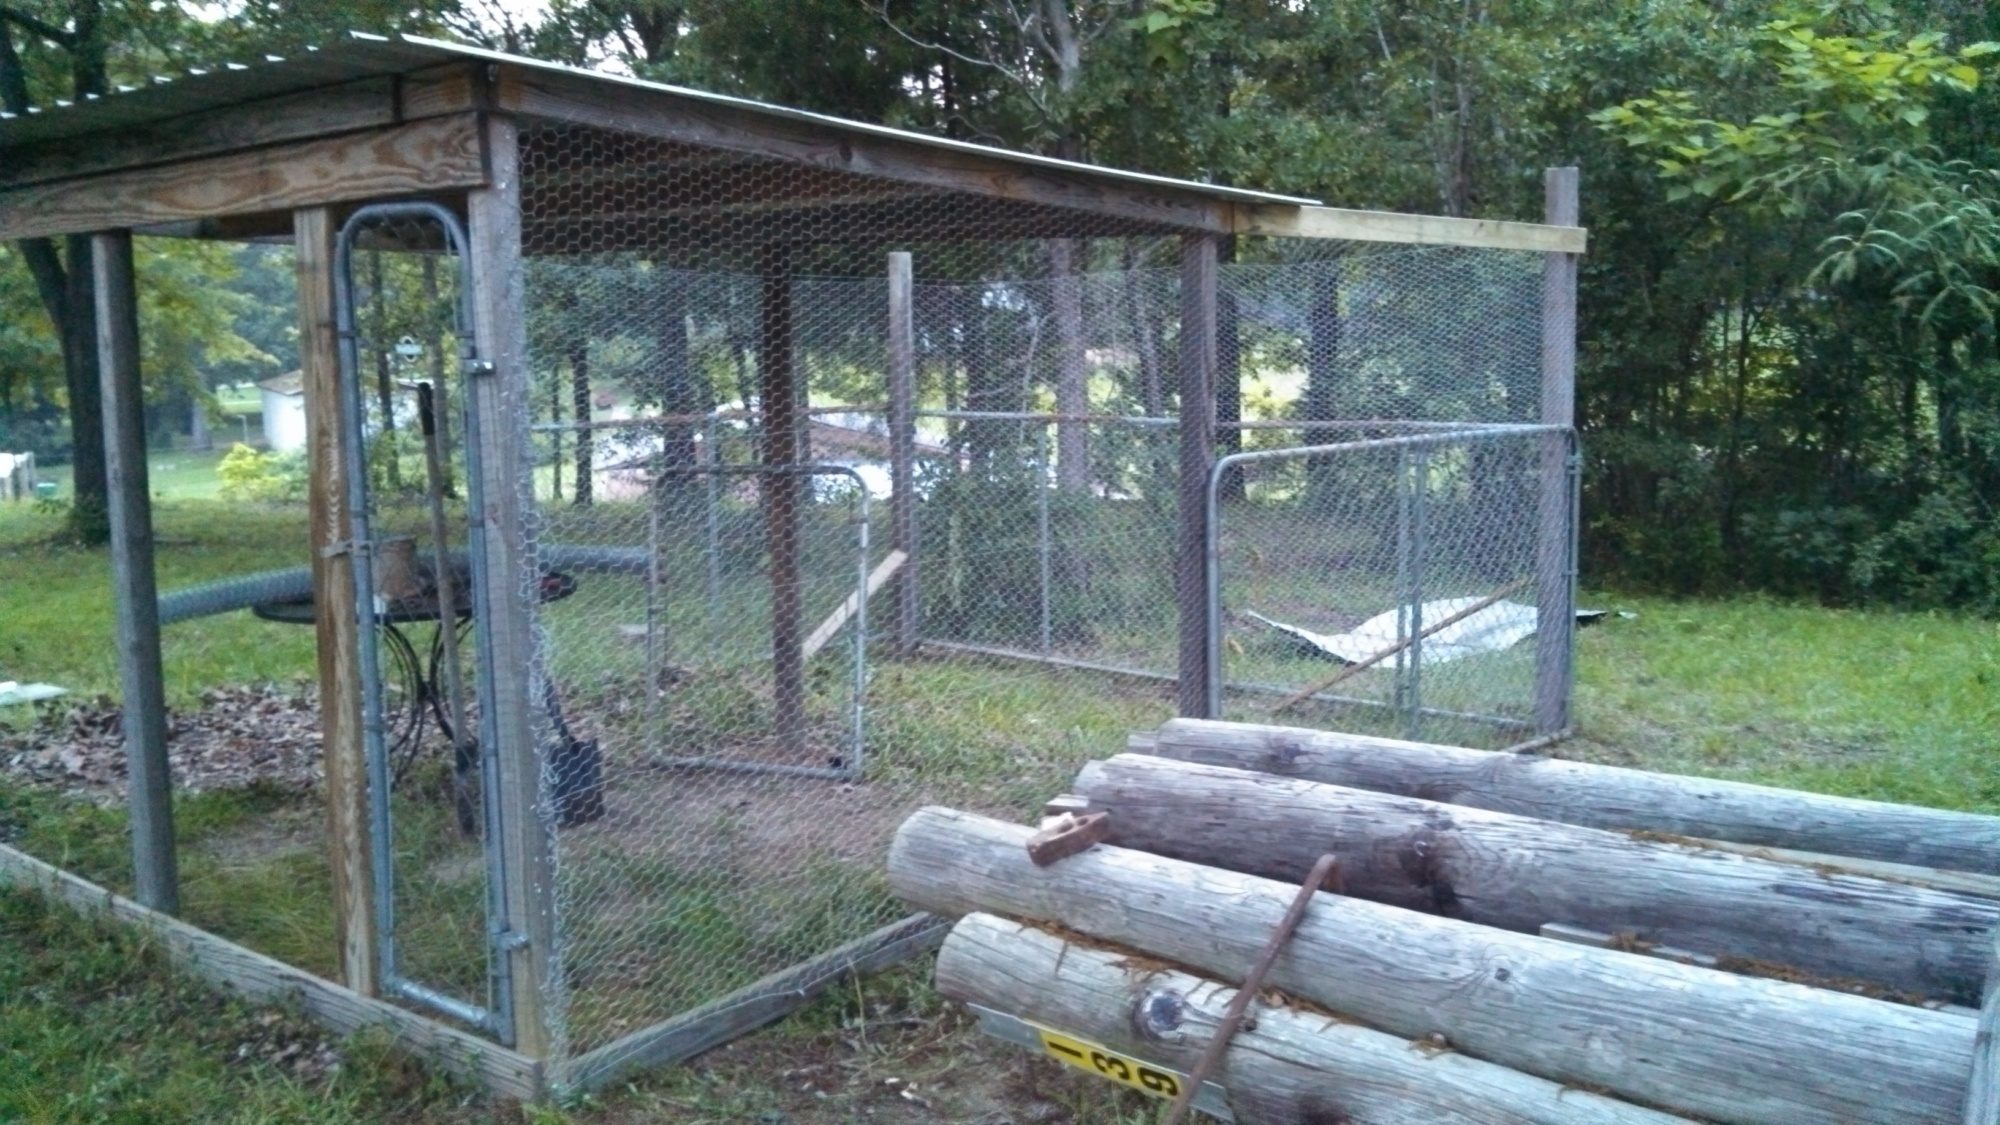 This was just the run before I started the coop. Its a 8x12 covered + a 8x12 open run for a total of a 12x16 run with a unused repurposed dog kennel door.